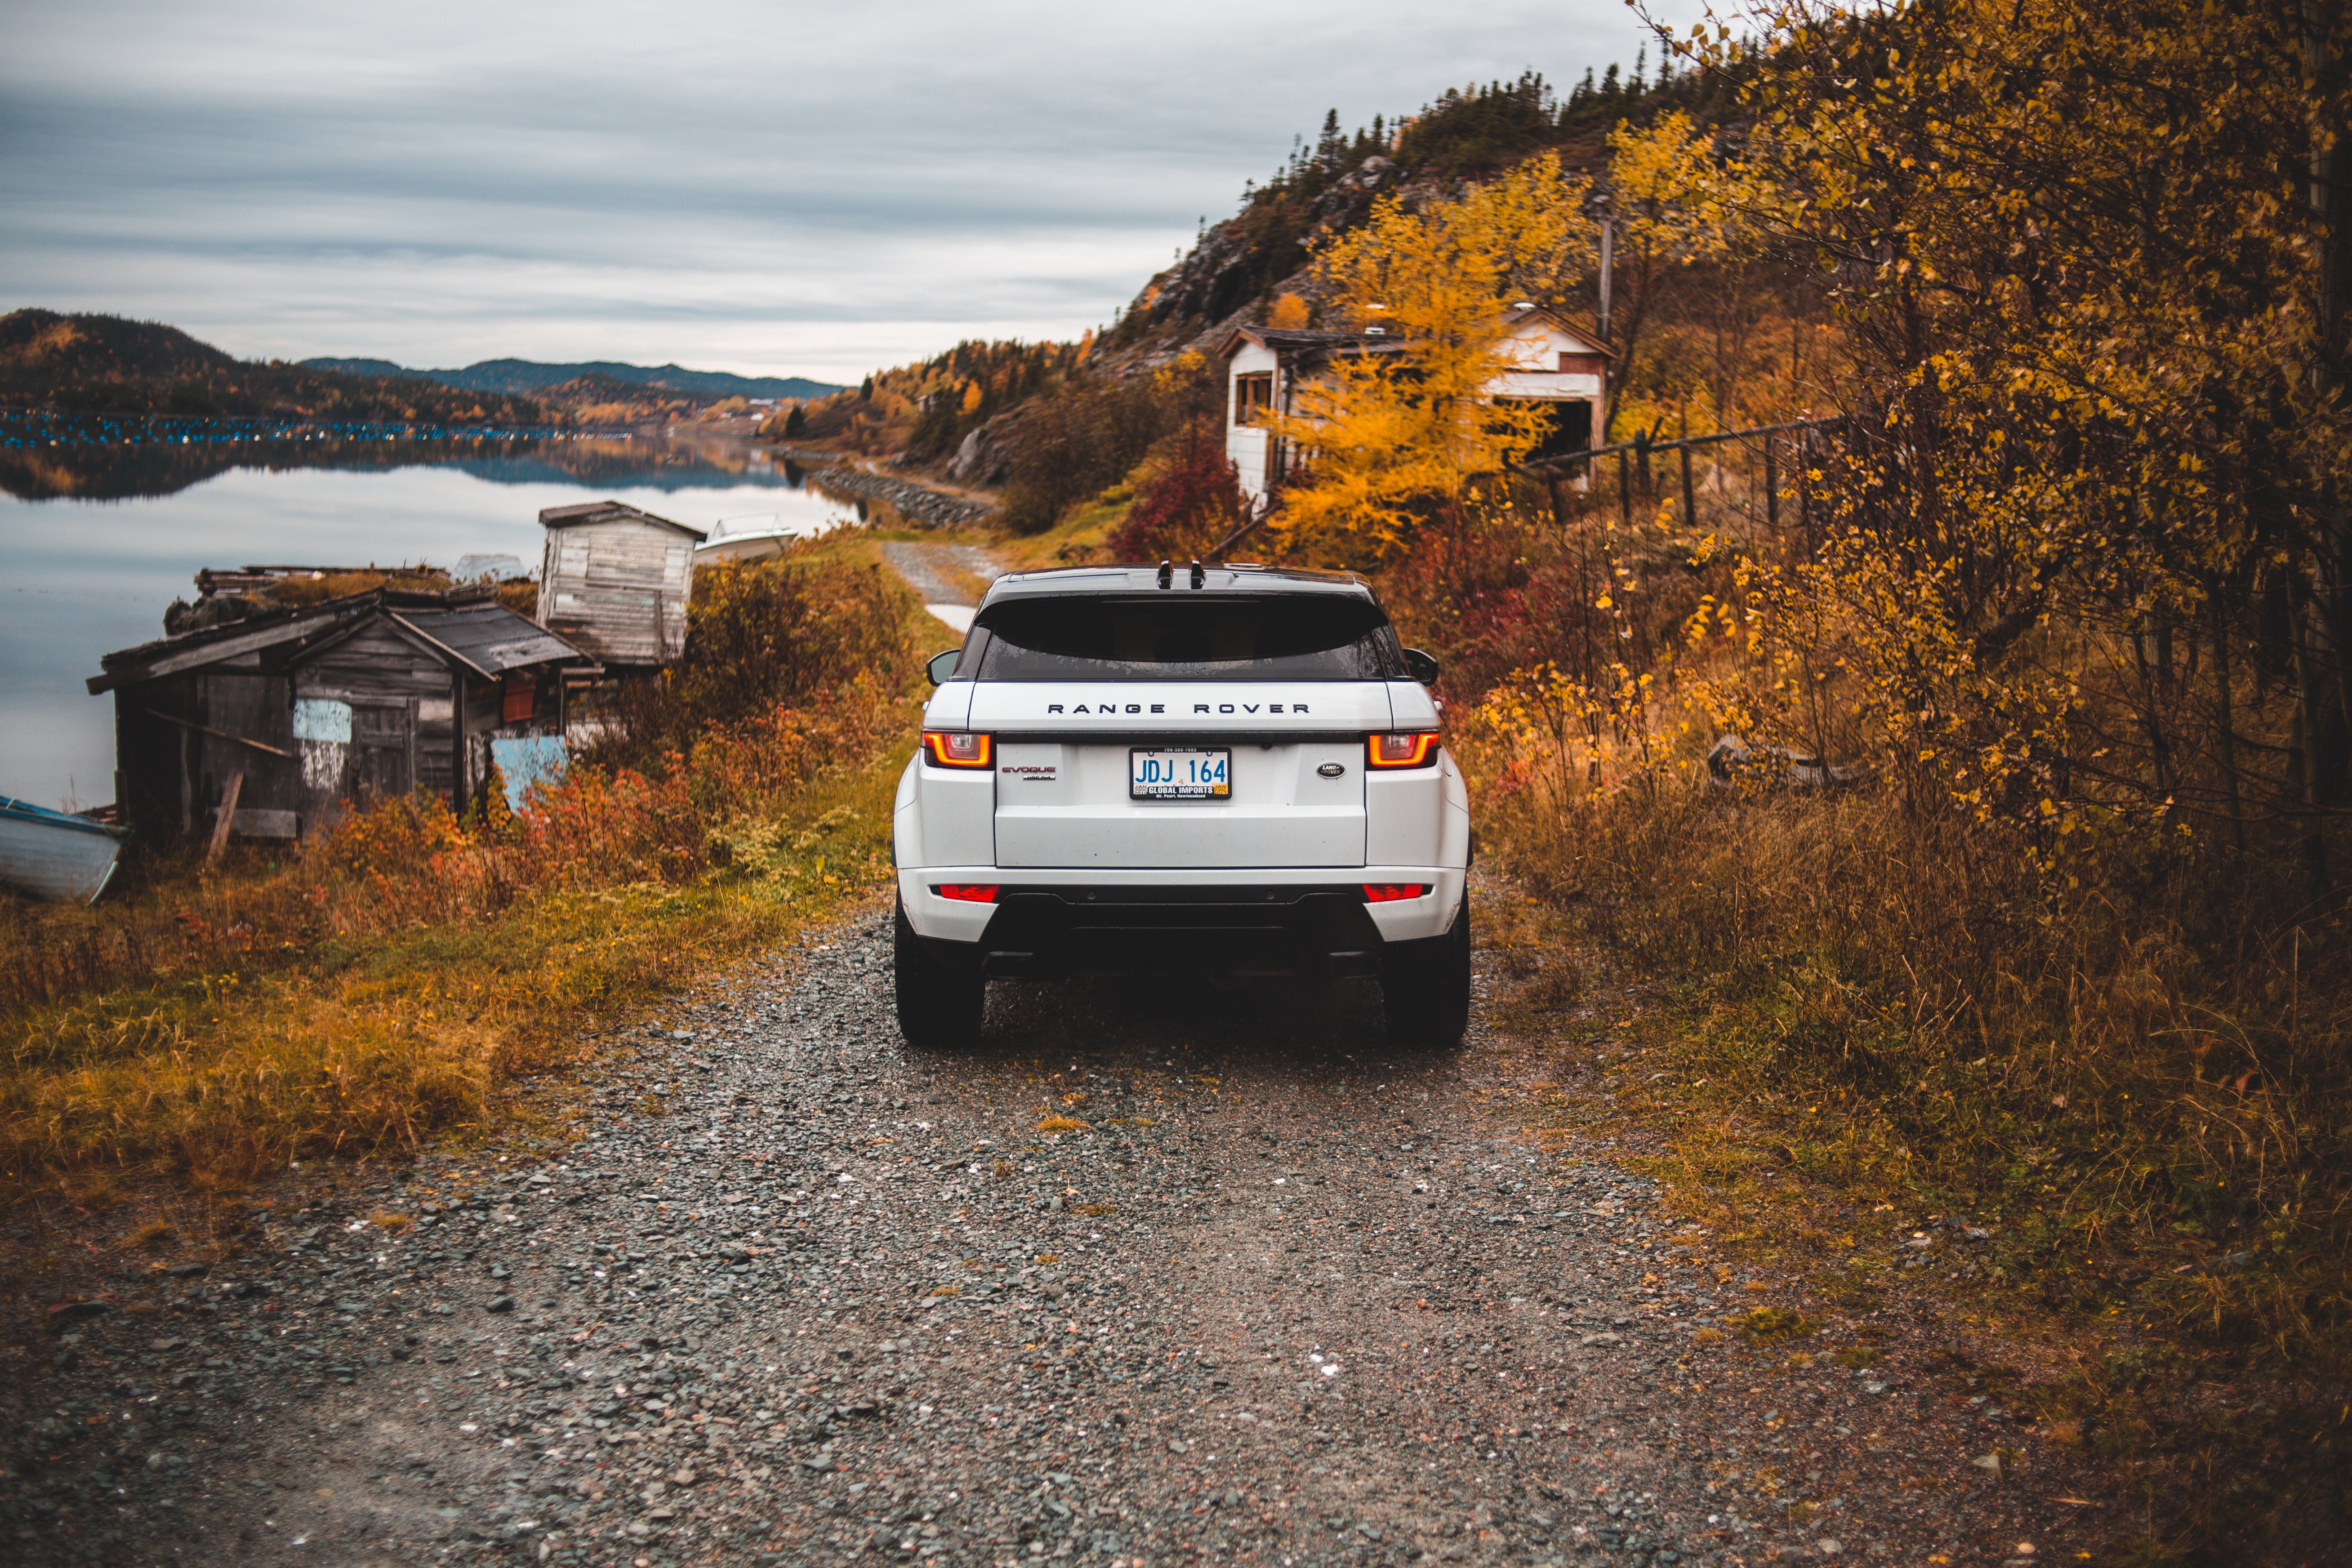 range rover, land rover, suv, cars, autumn, back view, rear view